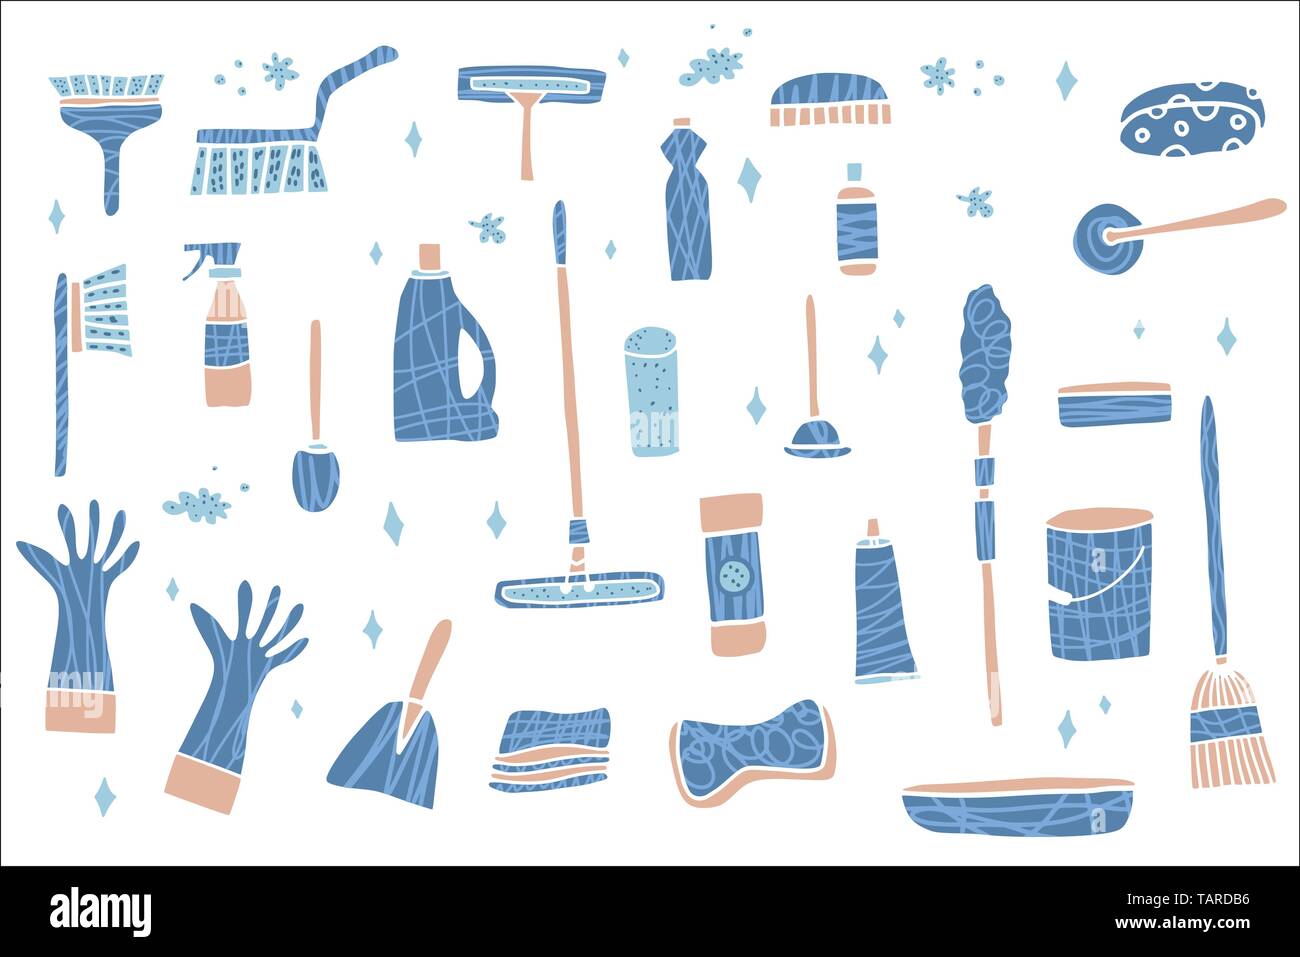 Set of icons for cleaning tools. House cleaning. Cleaning supplies. Flat  design style. Cleaning design elements. Vector illustration Stock Vector  Image & Art - Alamy